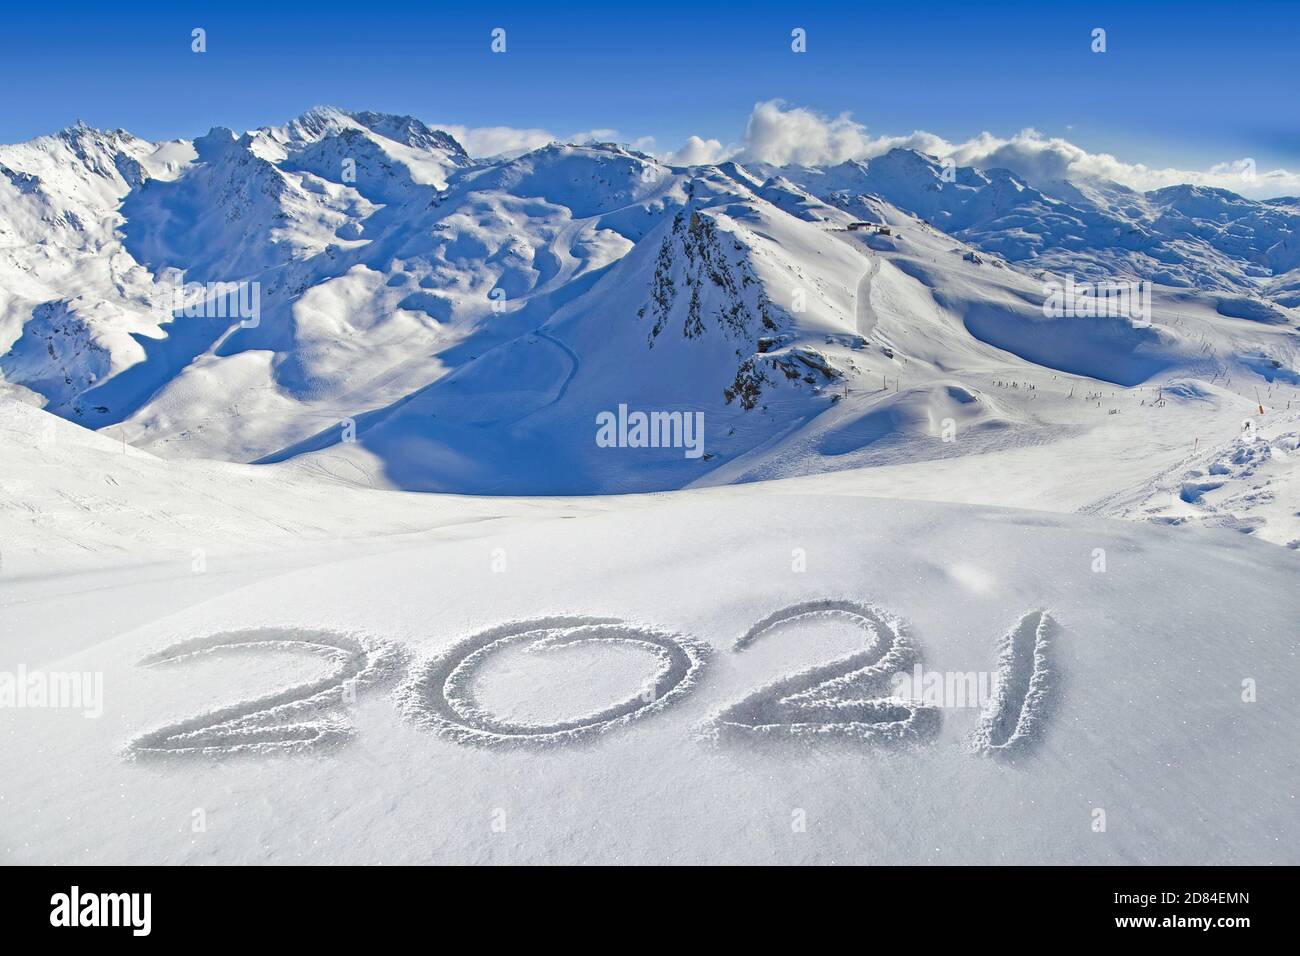 2021 written in the snow, mountain landscape in the background Stock Photo